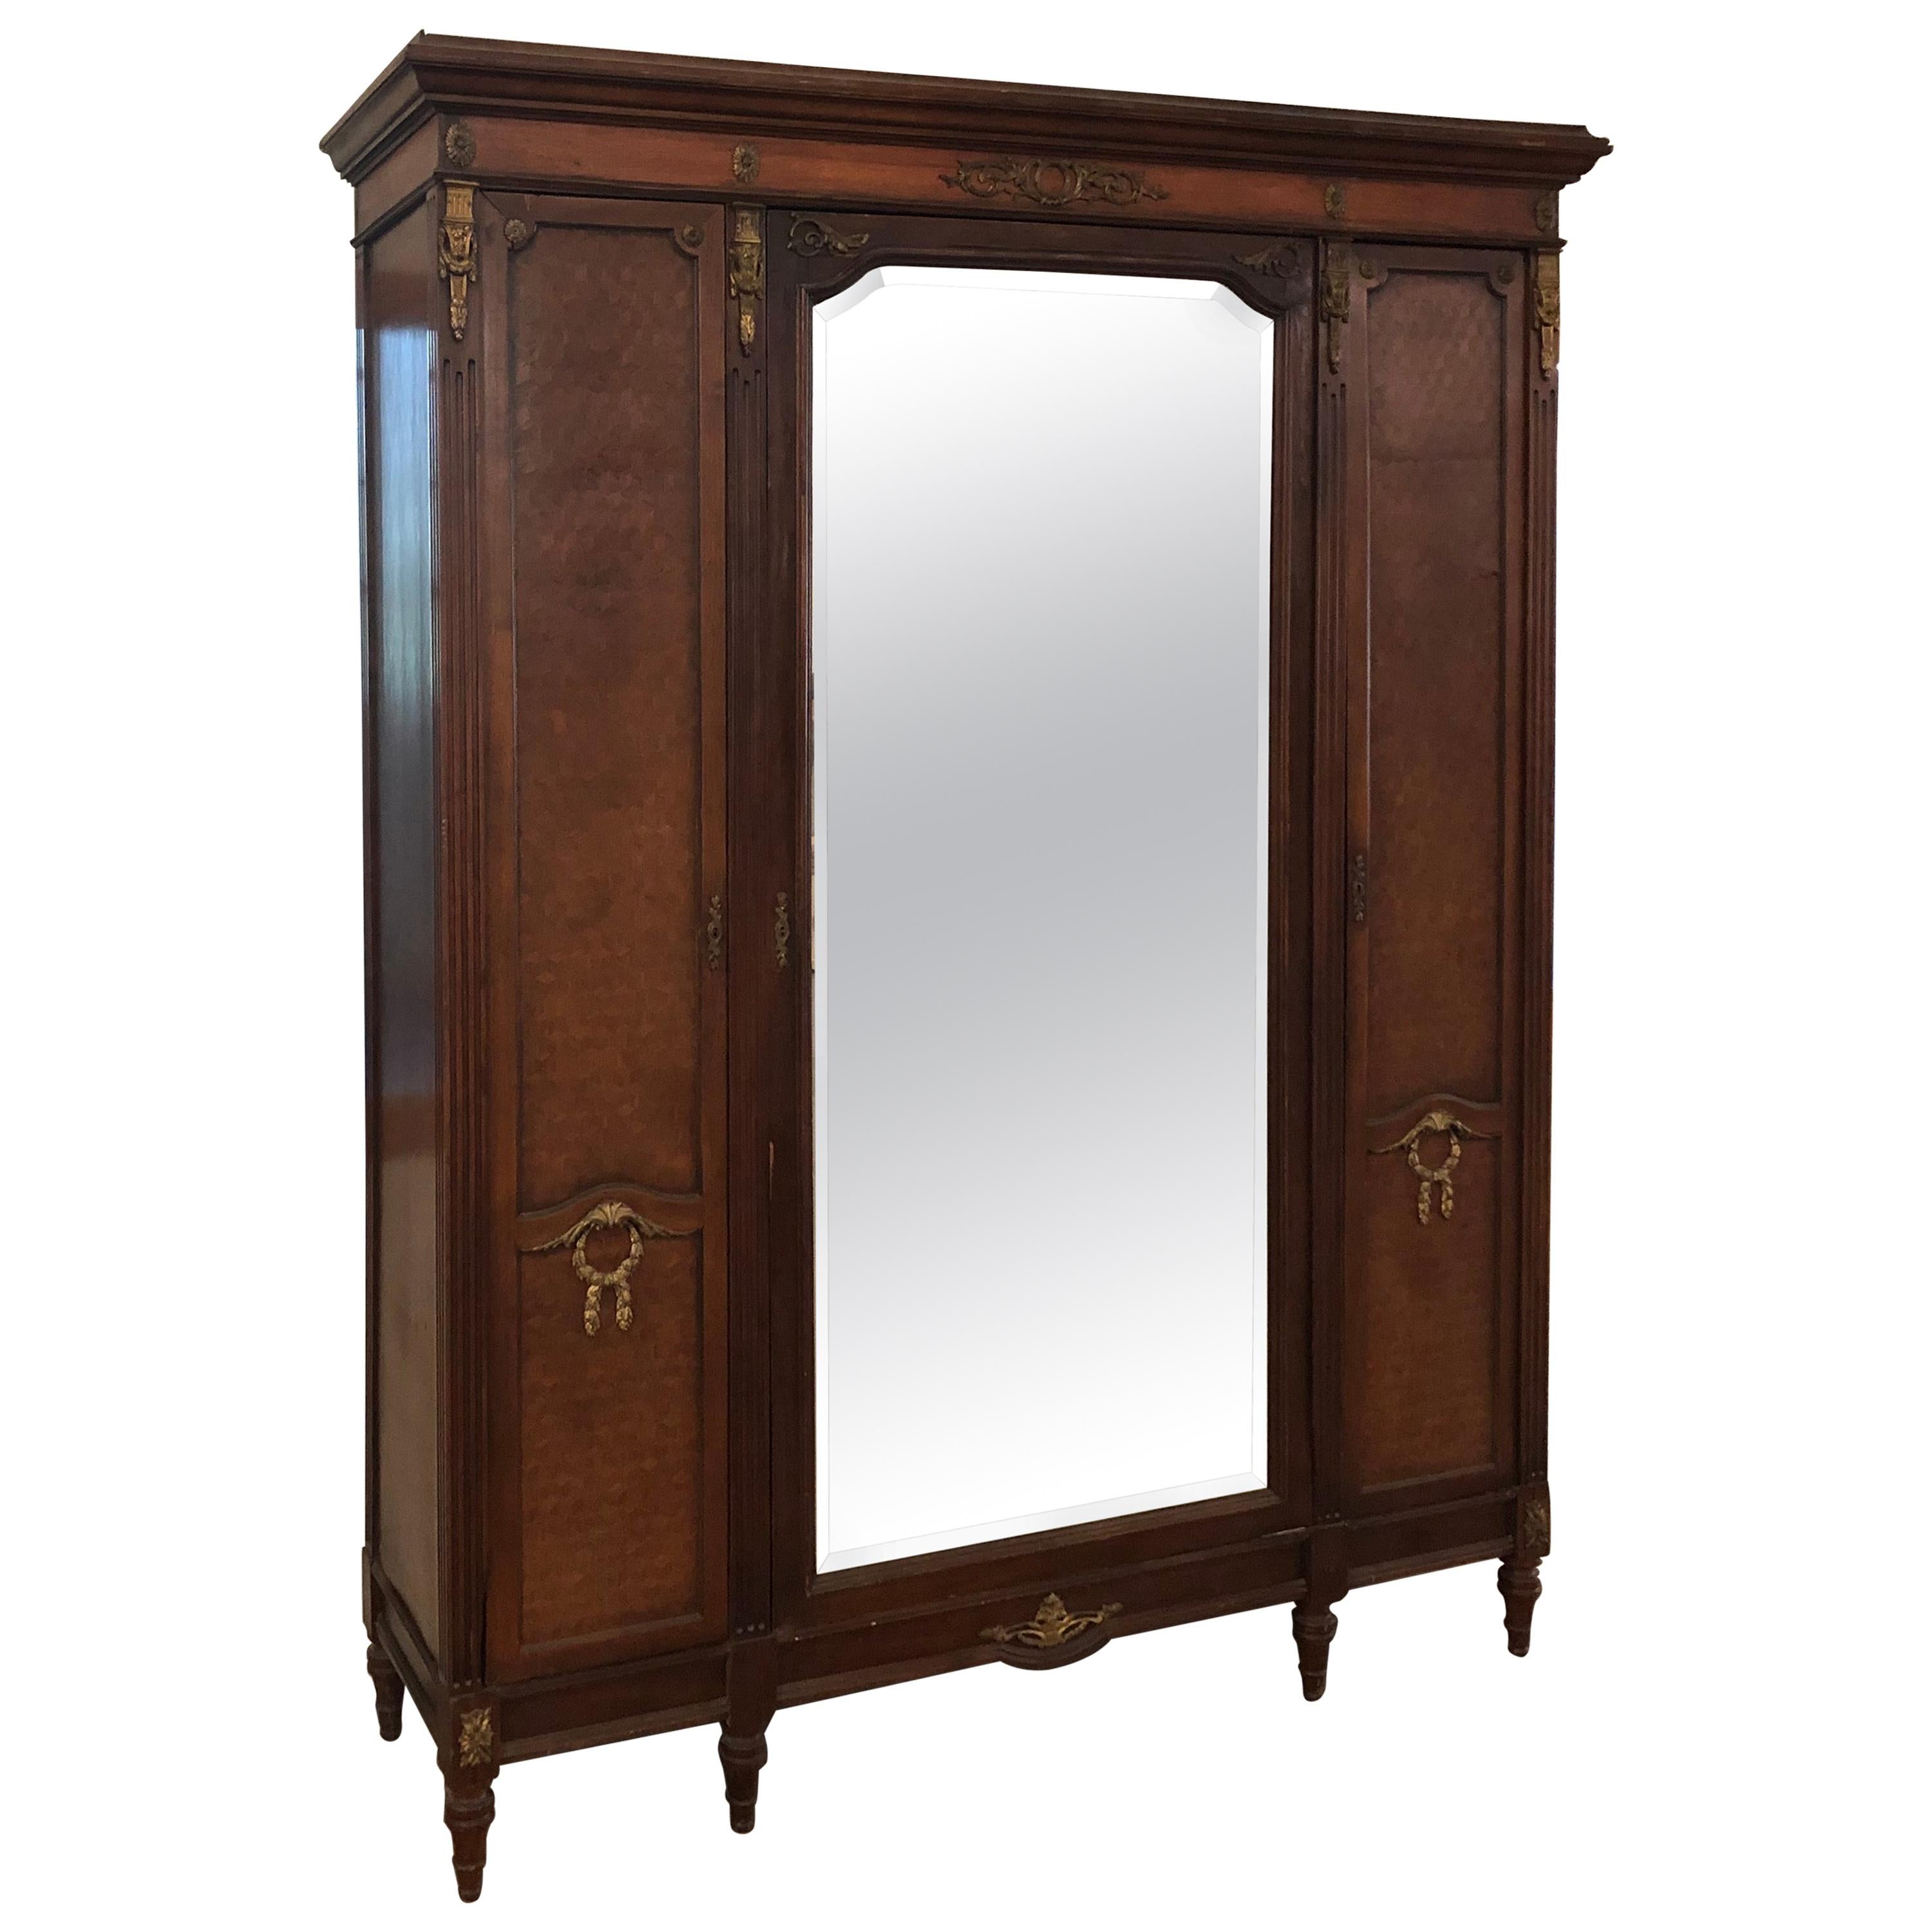 French Louis XVI Inlaid Parquetry and Ormolu Mirrored Armoire, circa 1900